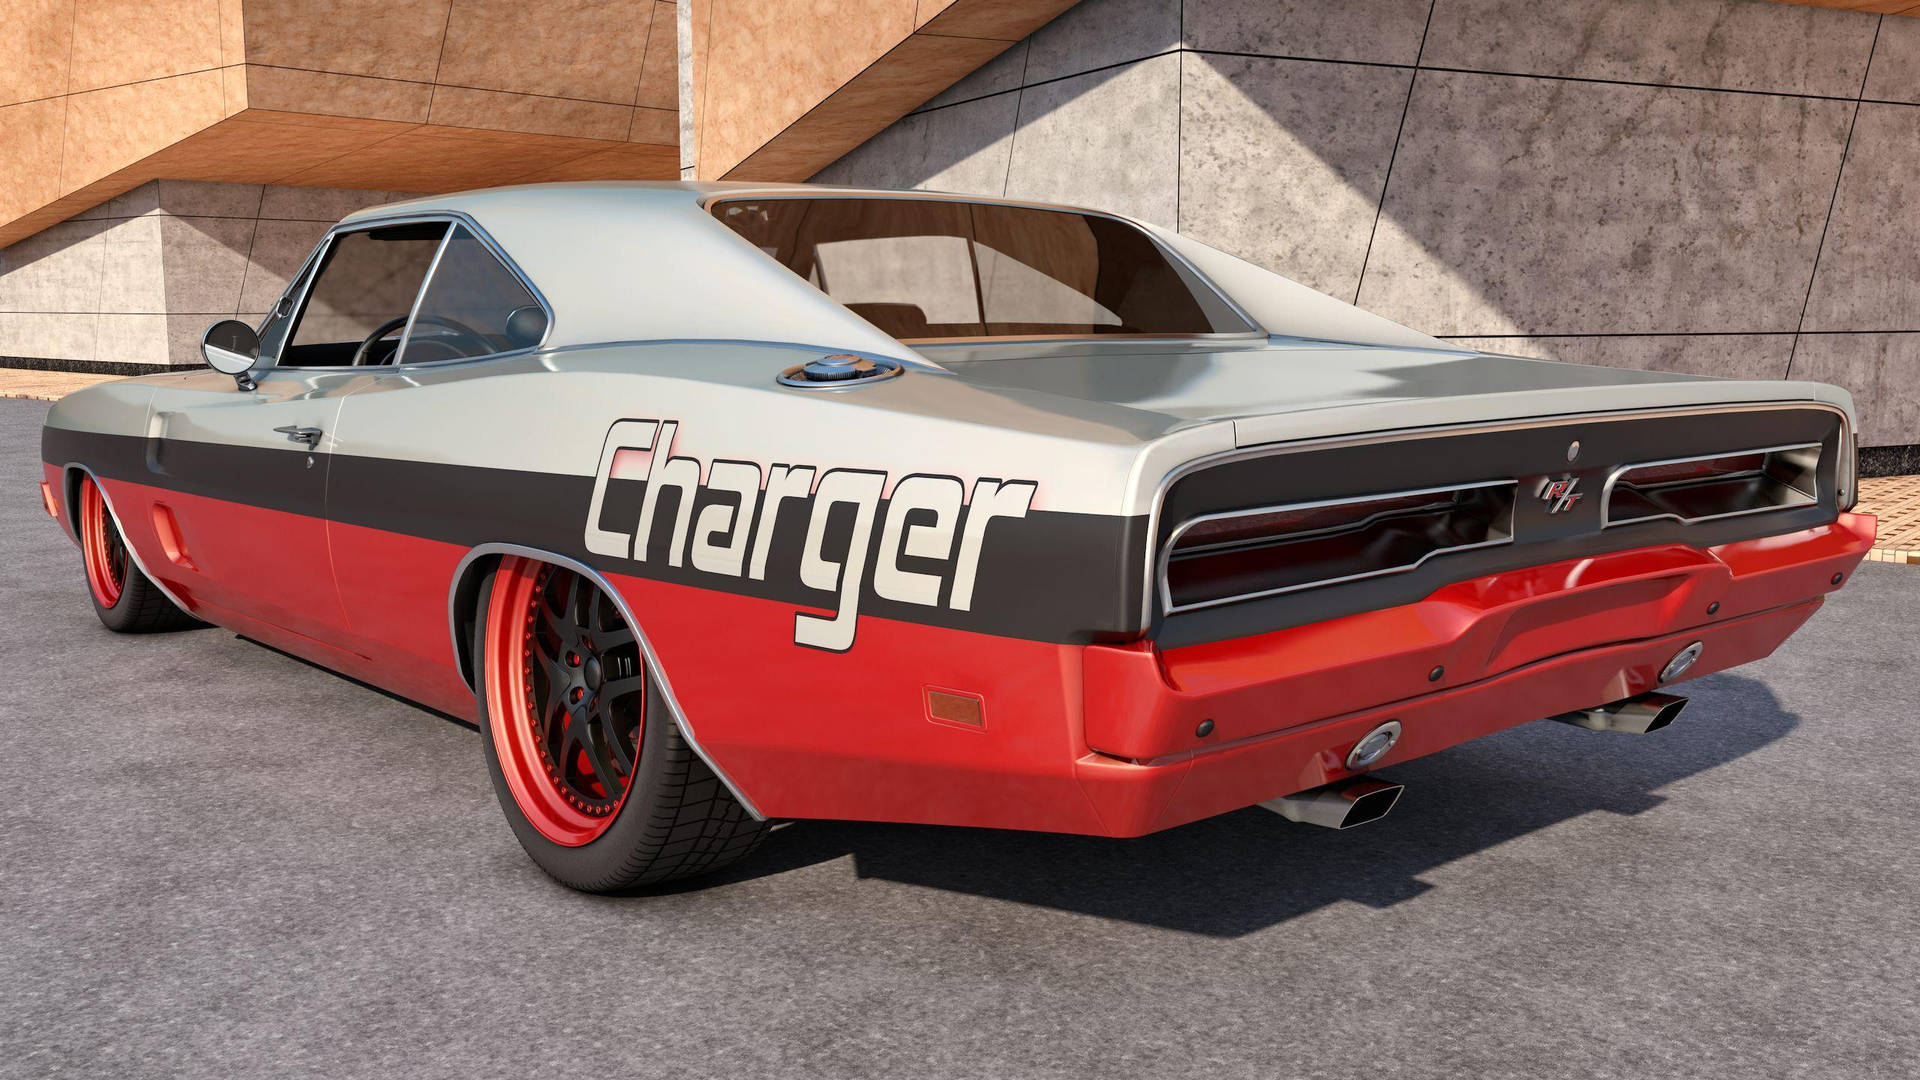 1969 Dodge Charger - Vintage American Muscle Car Background